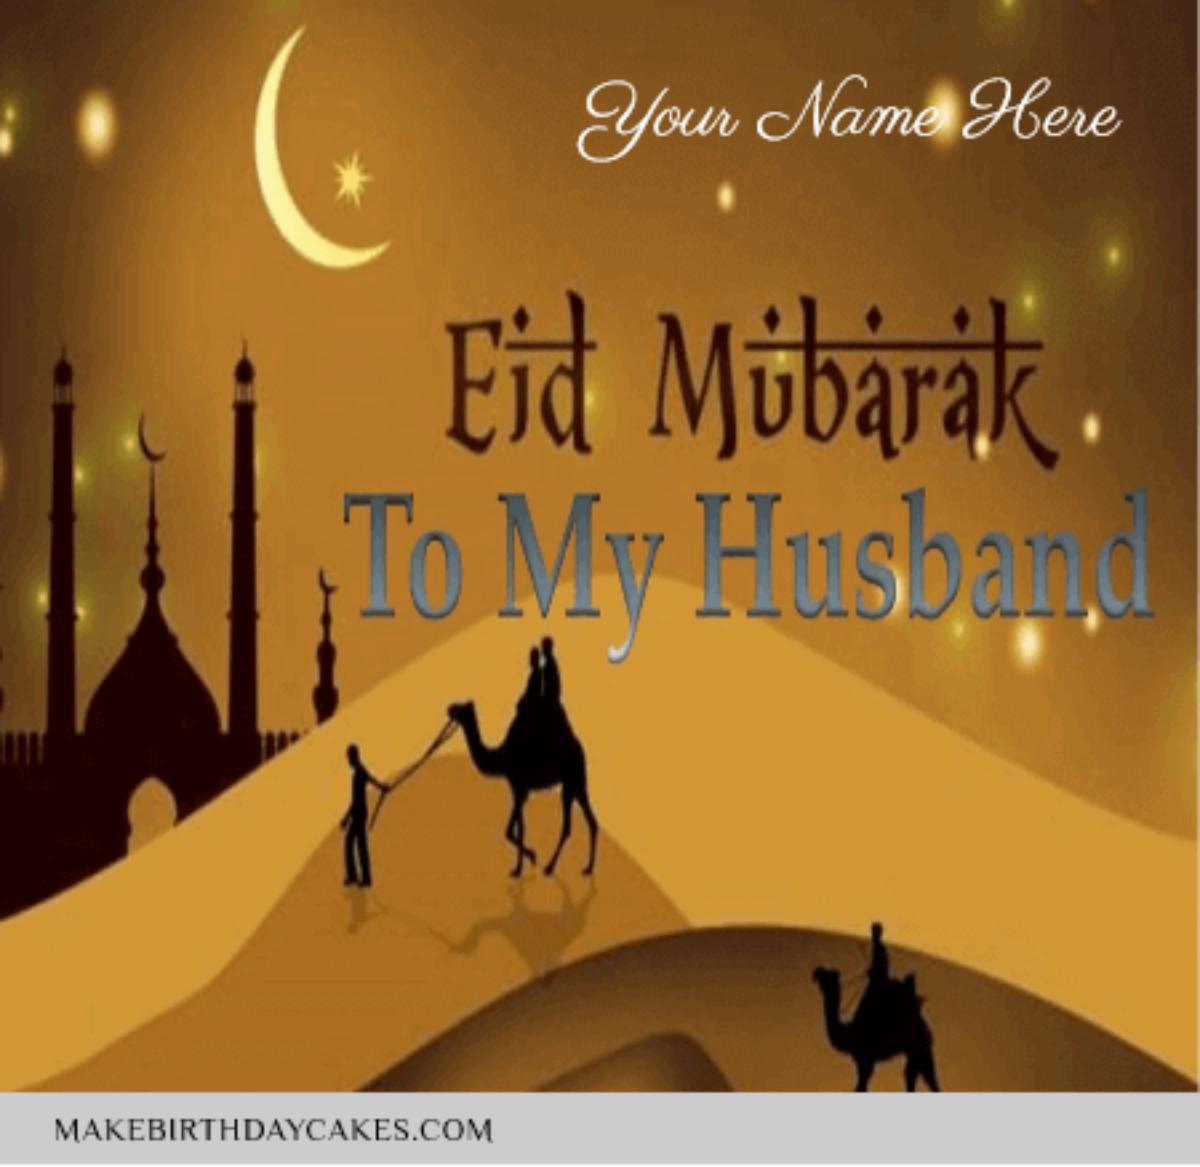 Advance Eid Mubarak Greeting Cards For Husband - Wishes With Name